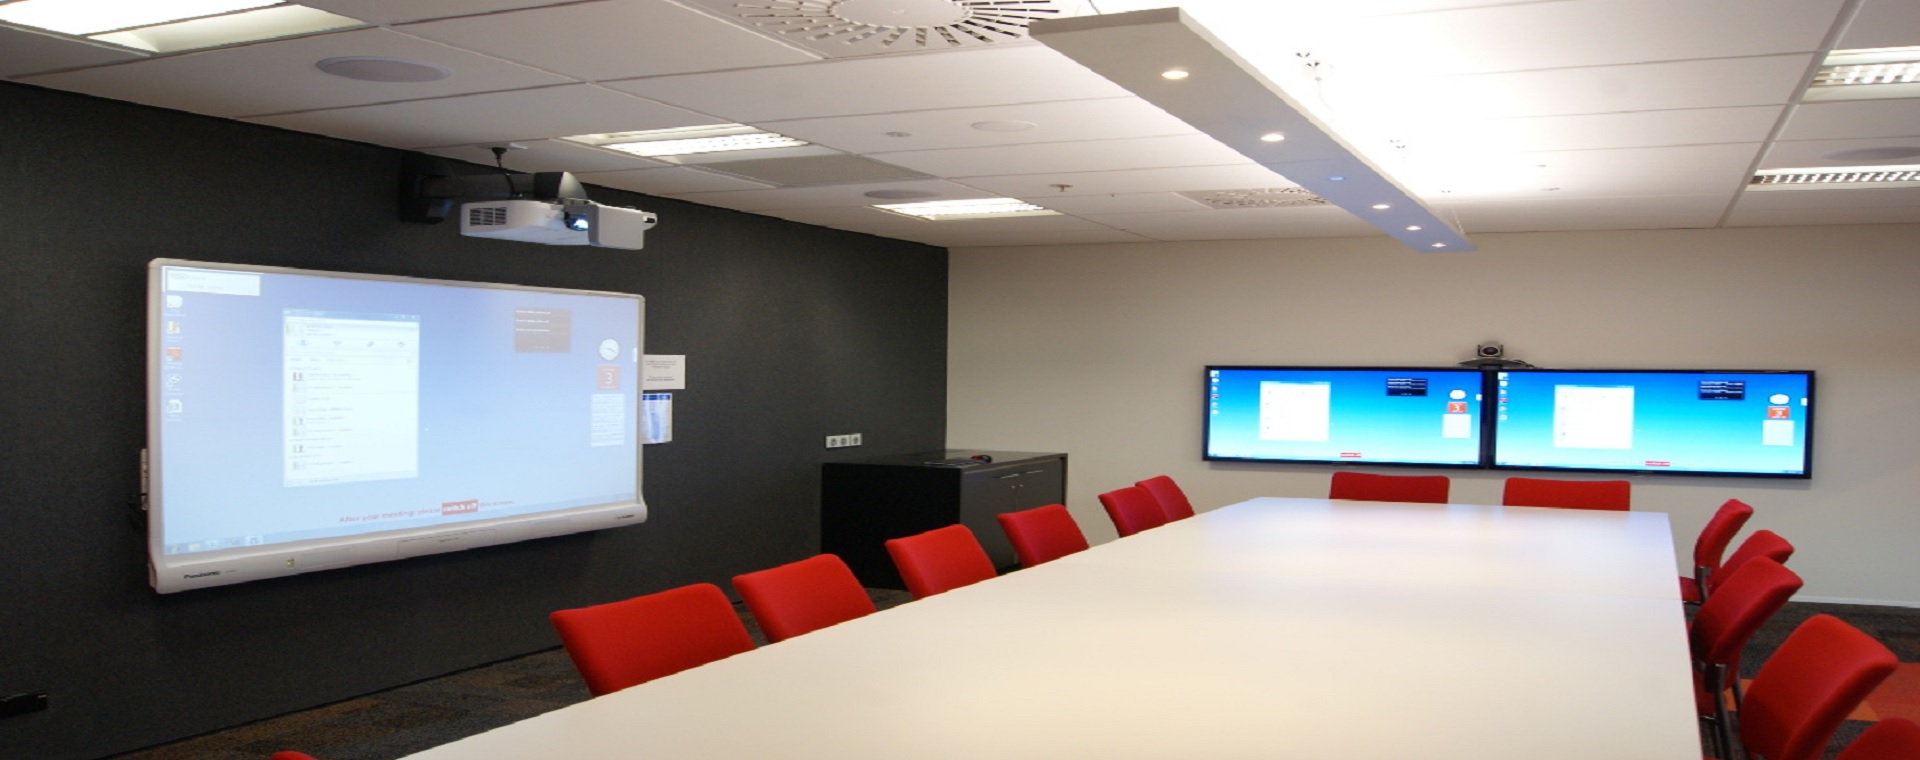 BECA meeting room with short-throw projector and 2 large format display panels